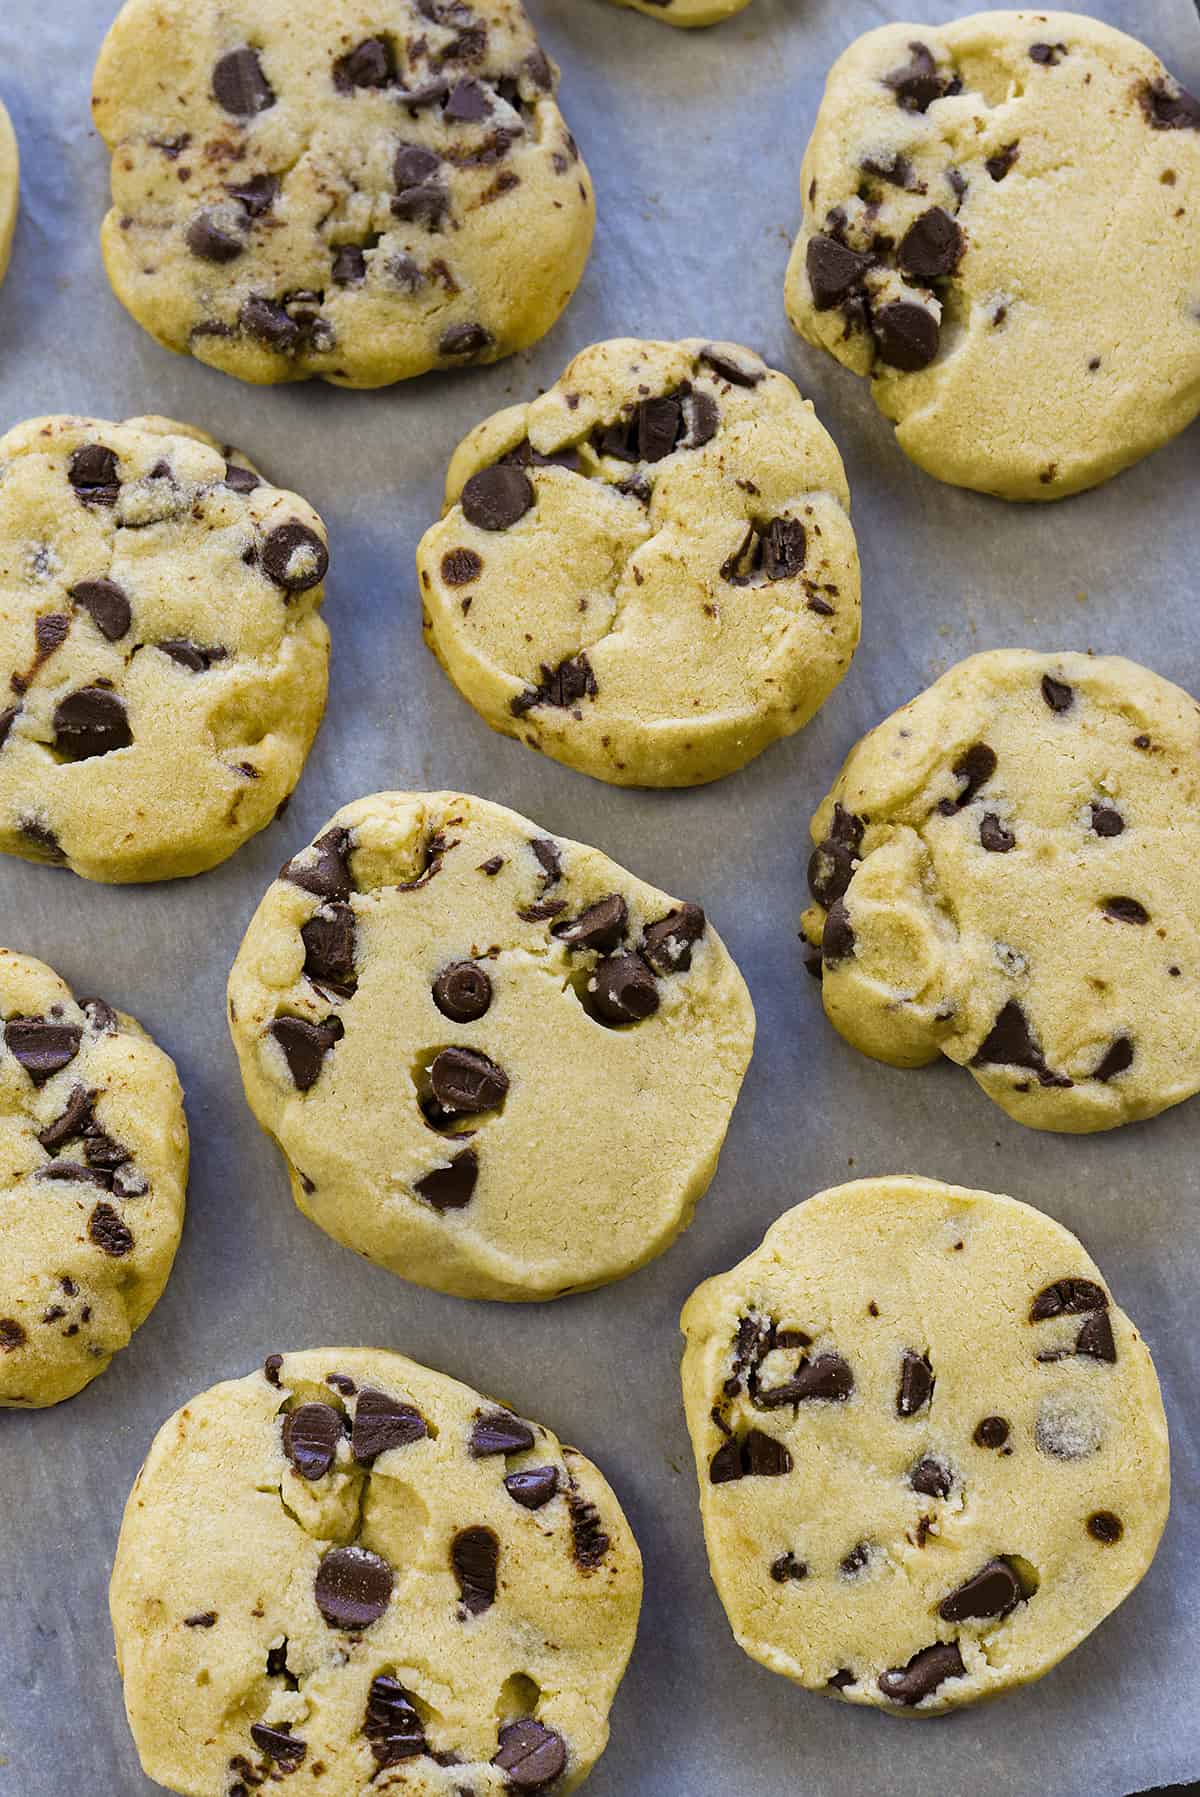 Chocolate chip shortbread cookies on baking sheet.